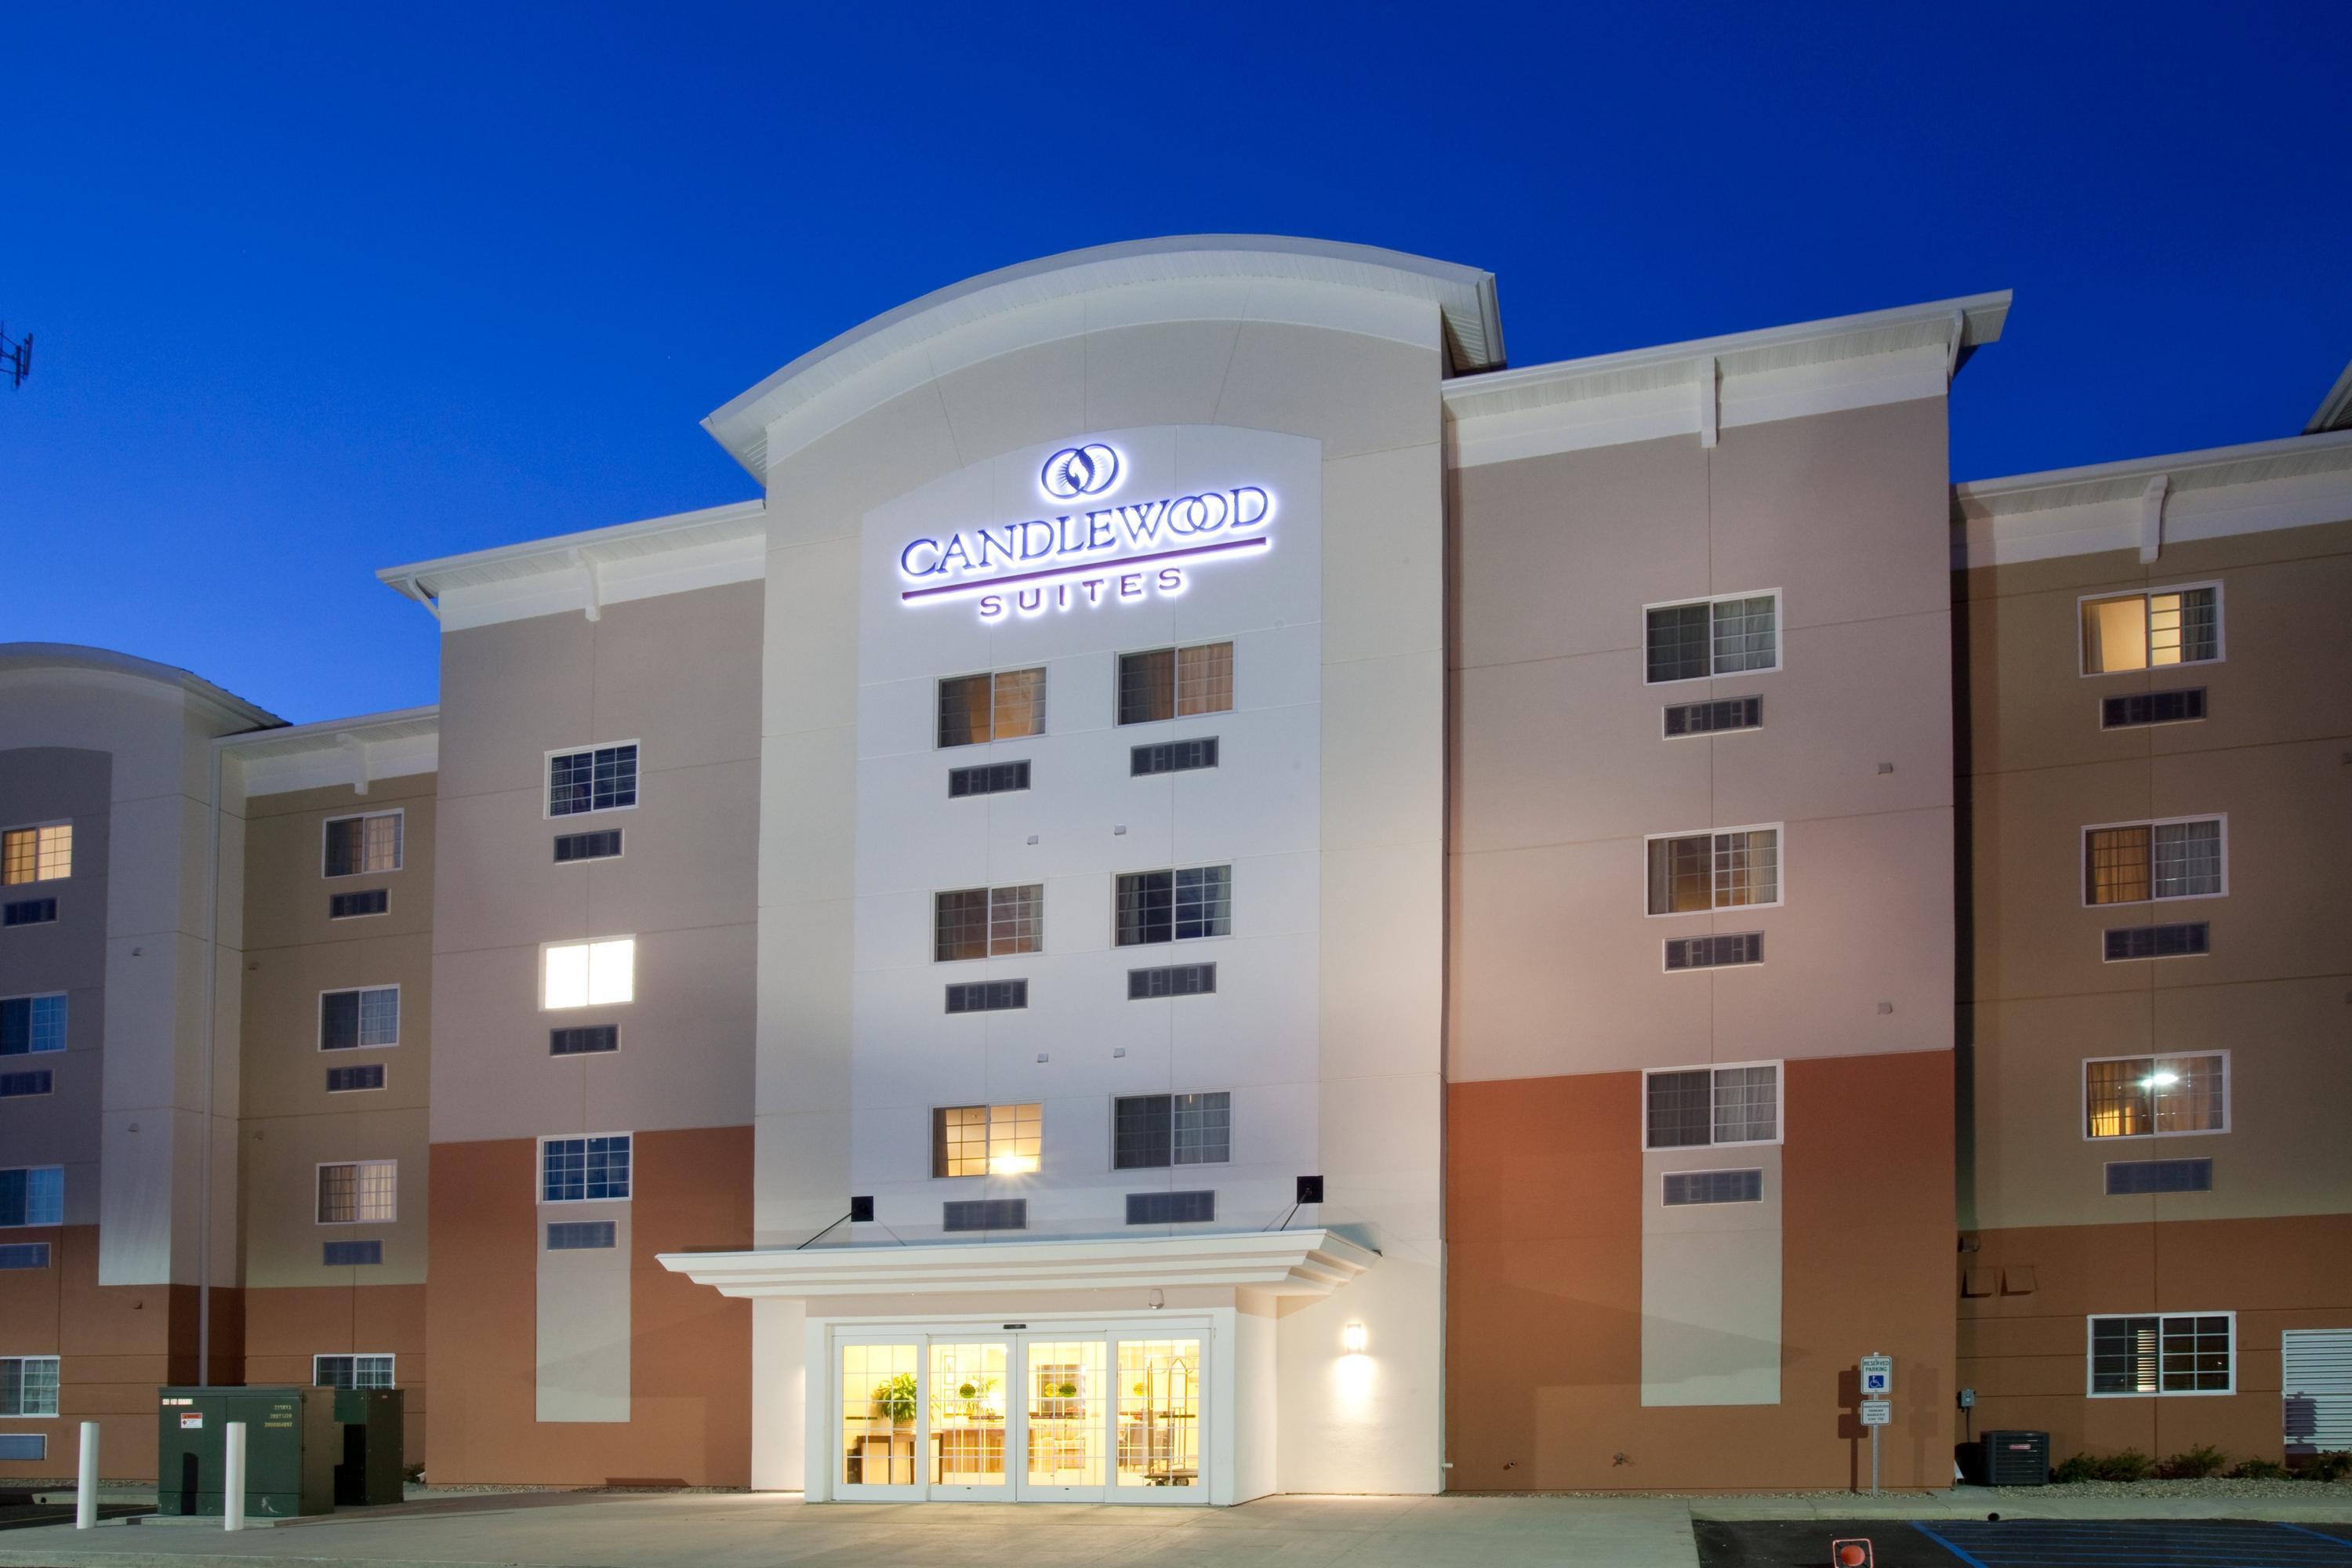 Candlewood Suites Watertown-Fort Drum- Tourist Class Evans Mills, NY  Hotels- GDS Reservation Codes: Travel Weekly